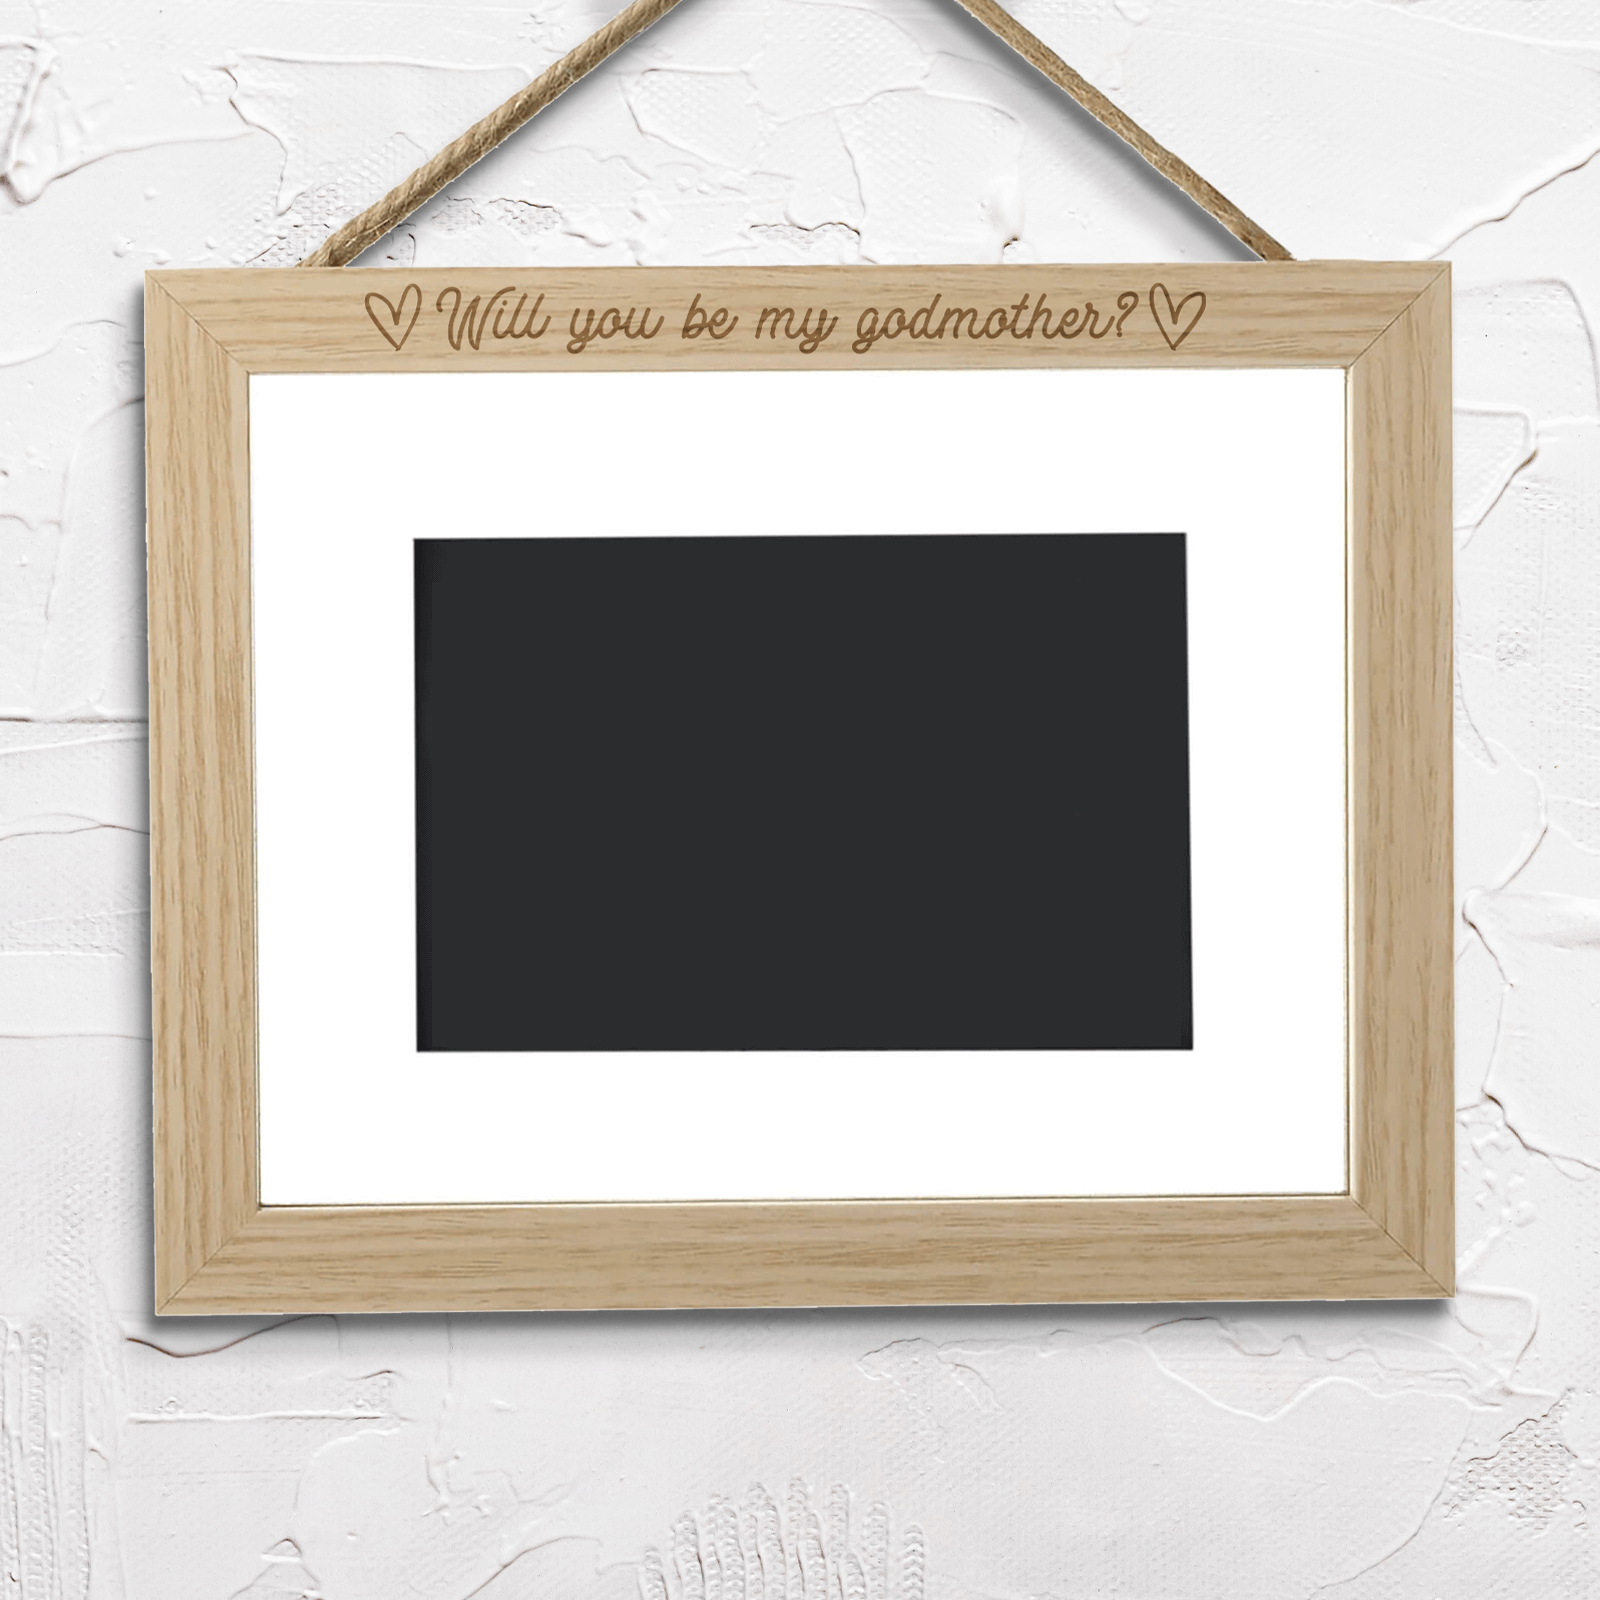 Will You Be My Godmother? Landscape Frame - Large - 24x33cm